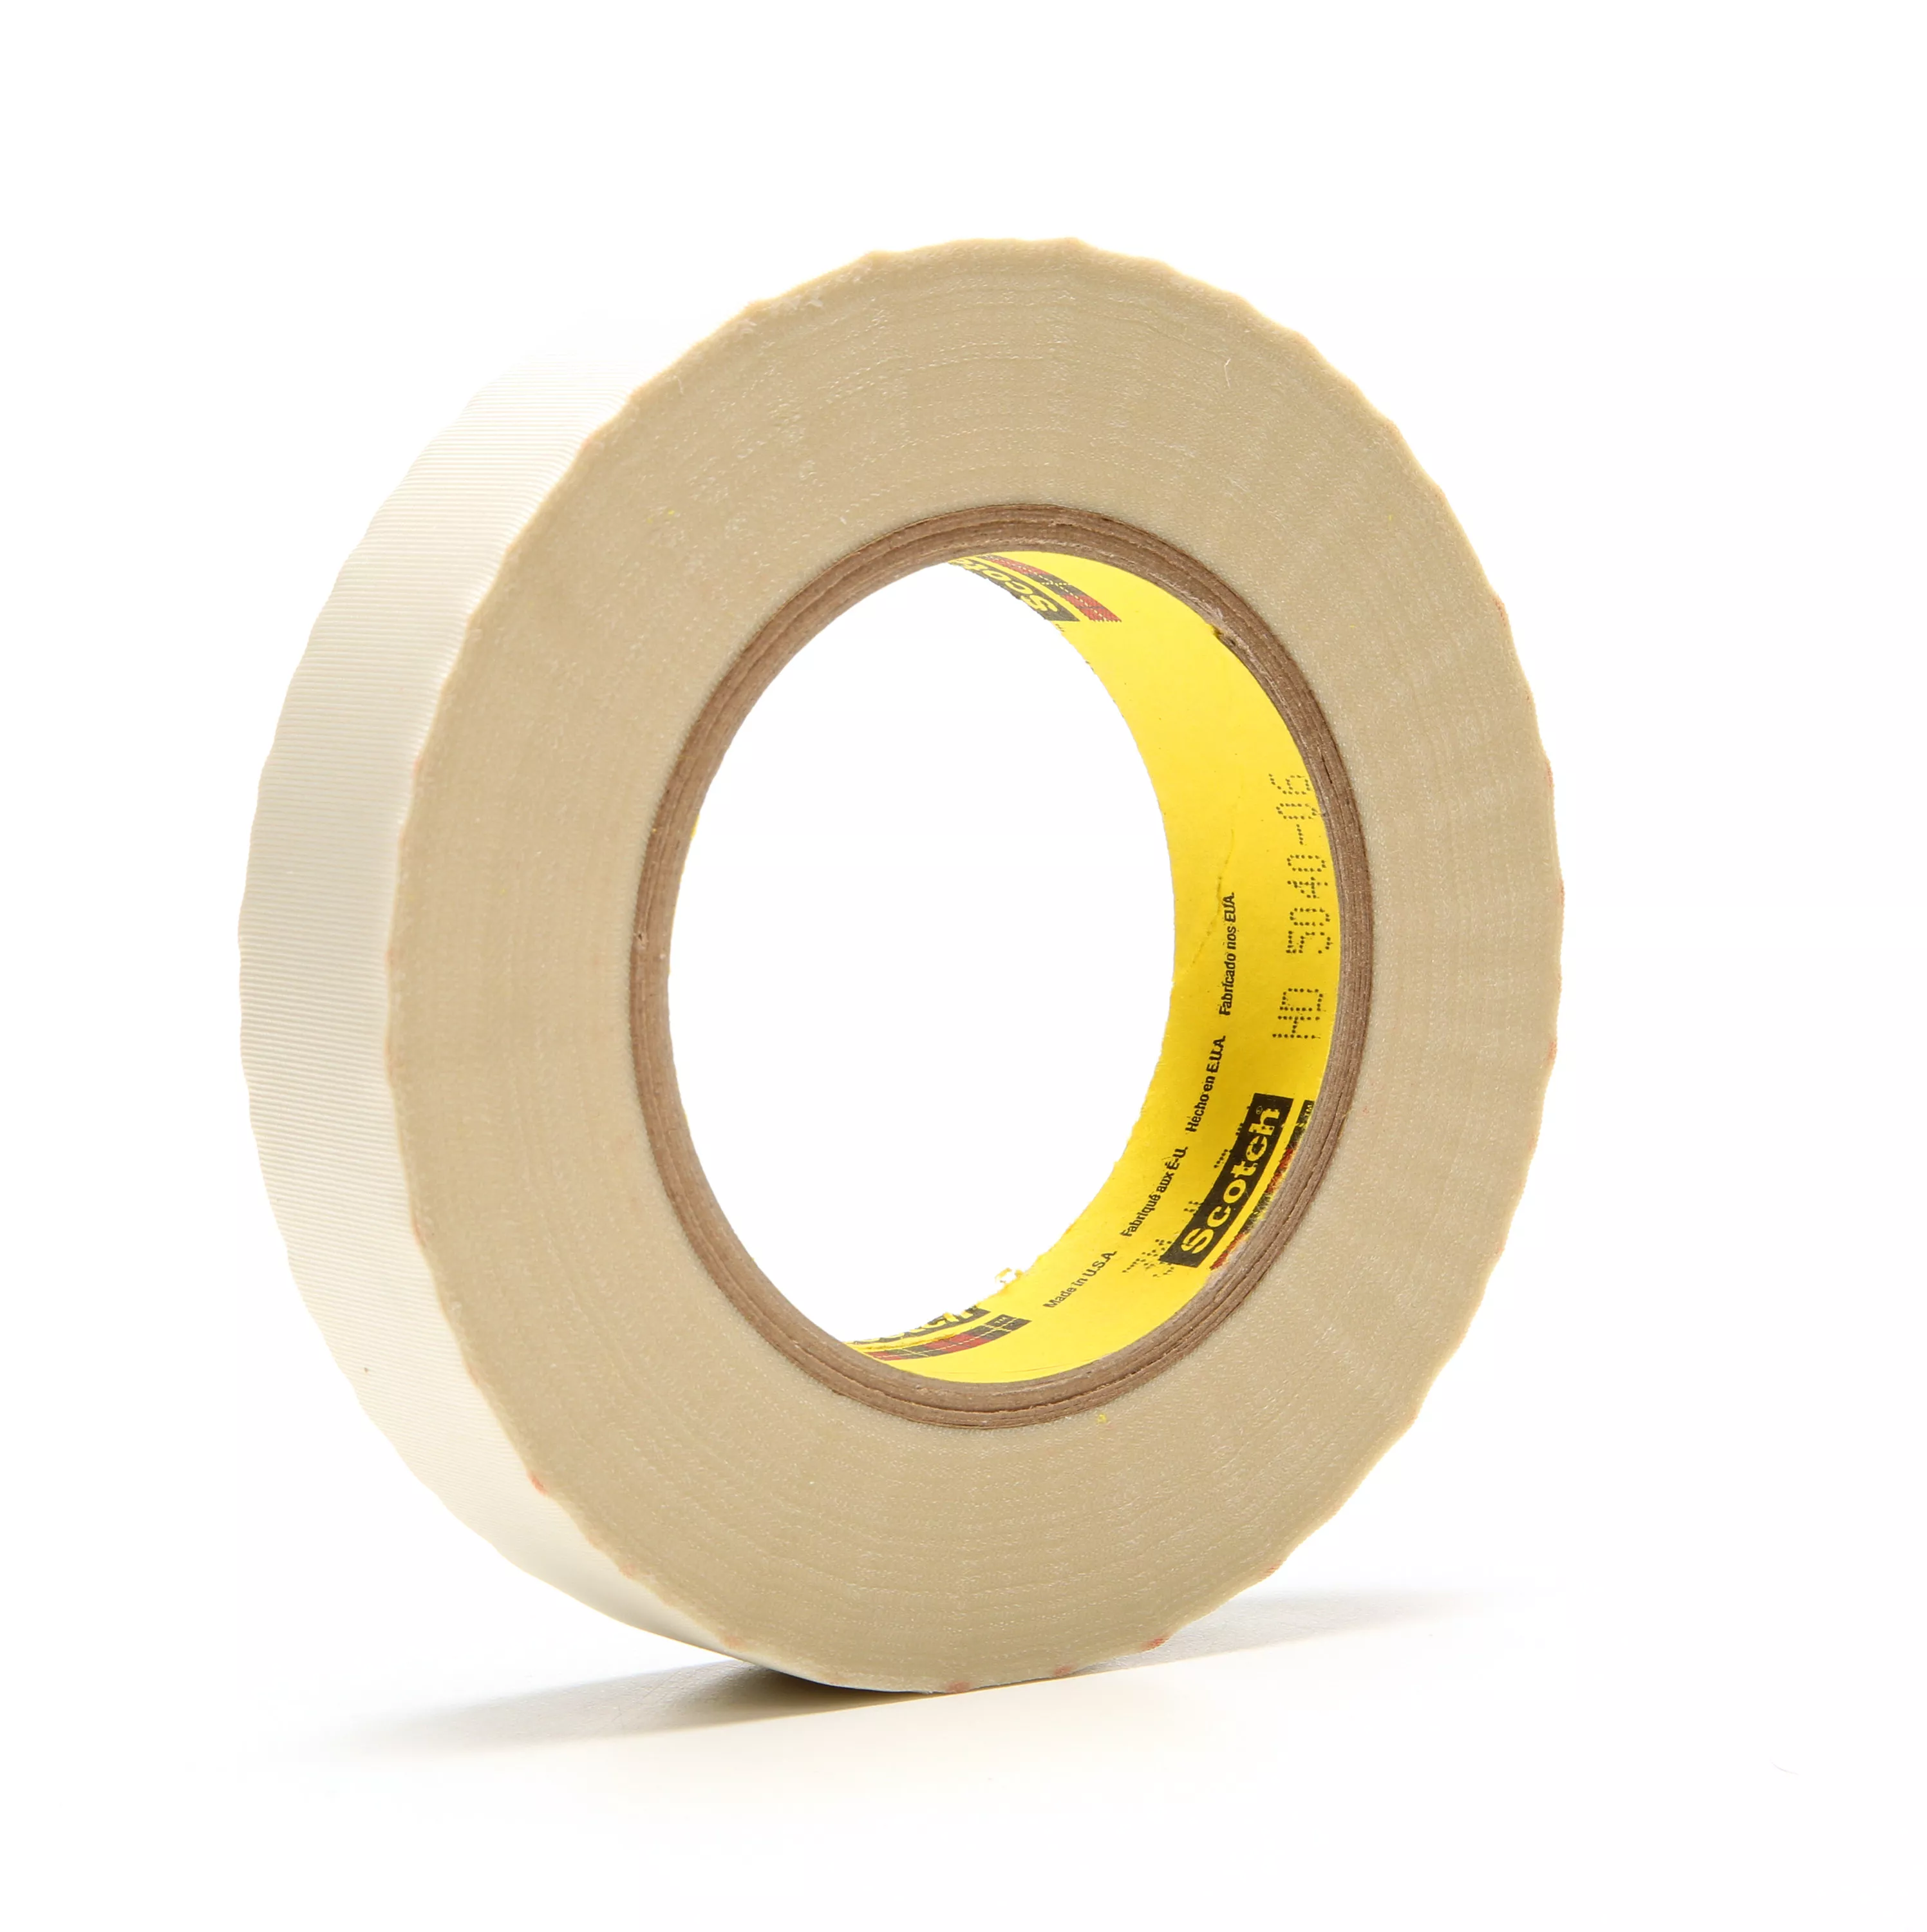 3M™ Glass Cloth Tape 361, White, 1 in x 60 yd, 6.4 mil, 9 Roll/Case,
Individually Wrapped Conveniently Packaged